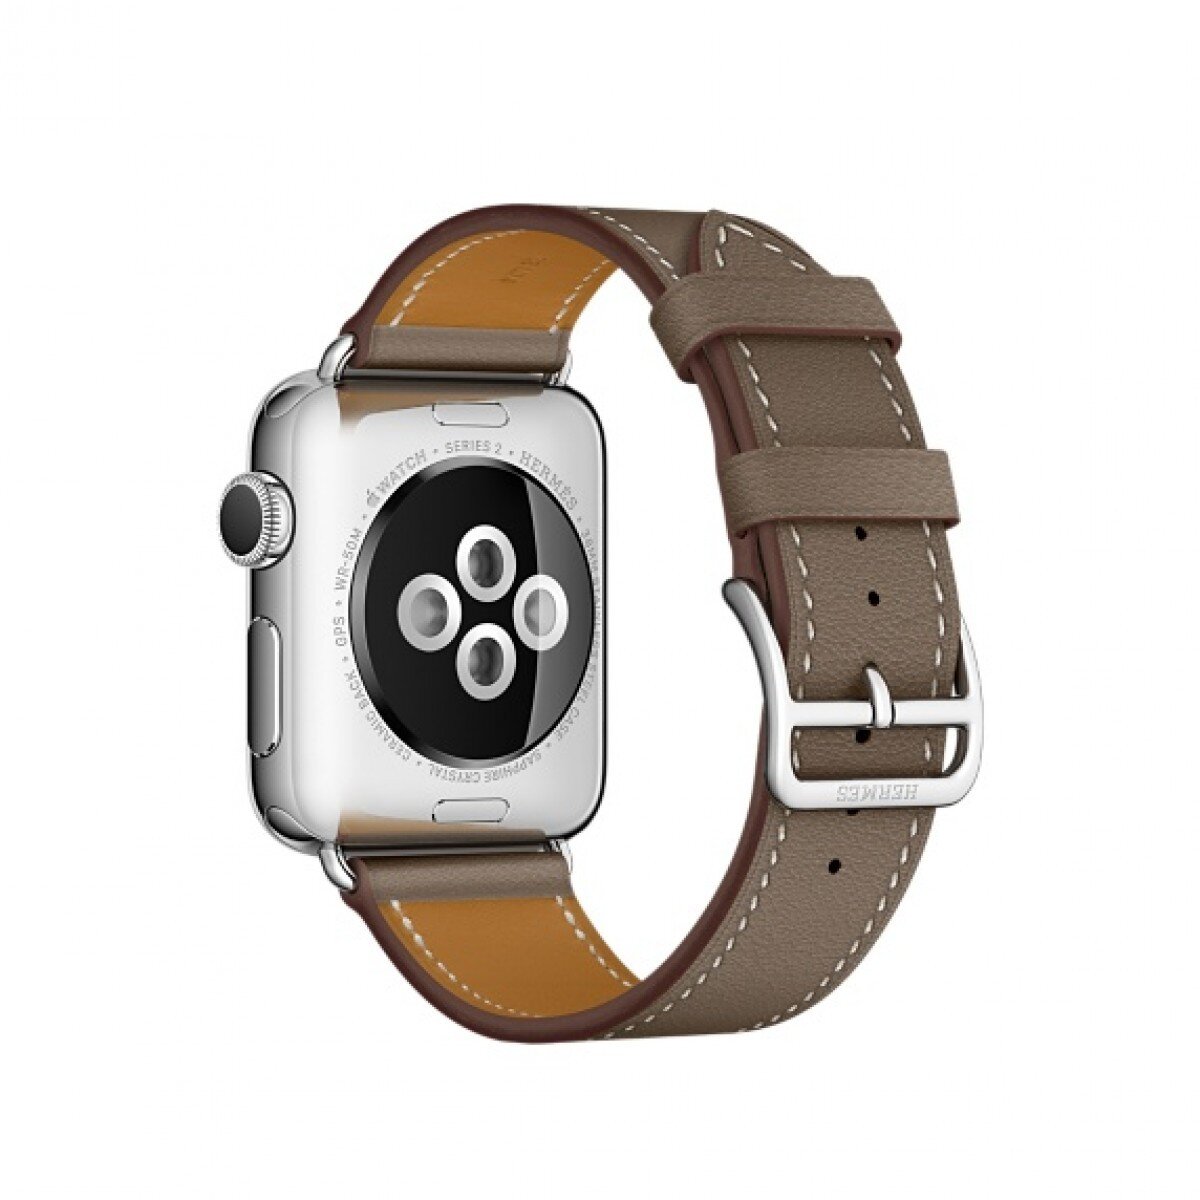 Buy Apple Watch Hermes Leather Single Tour Band online in ...